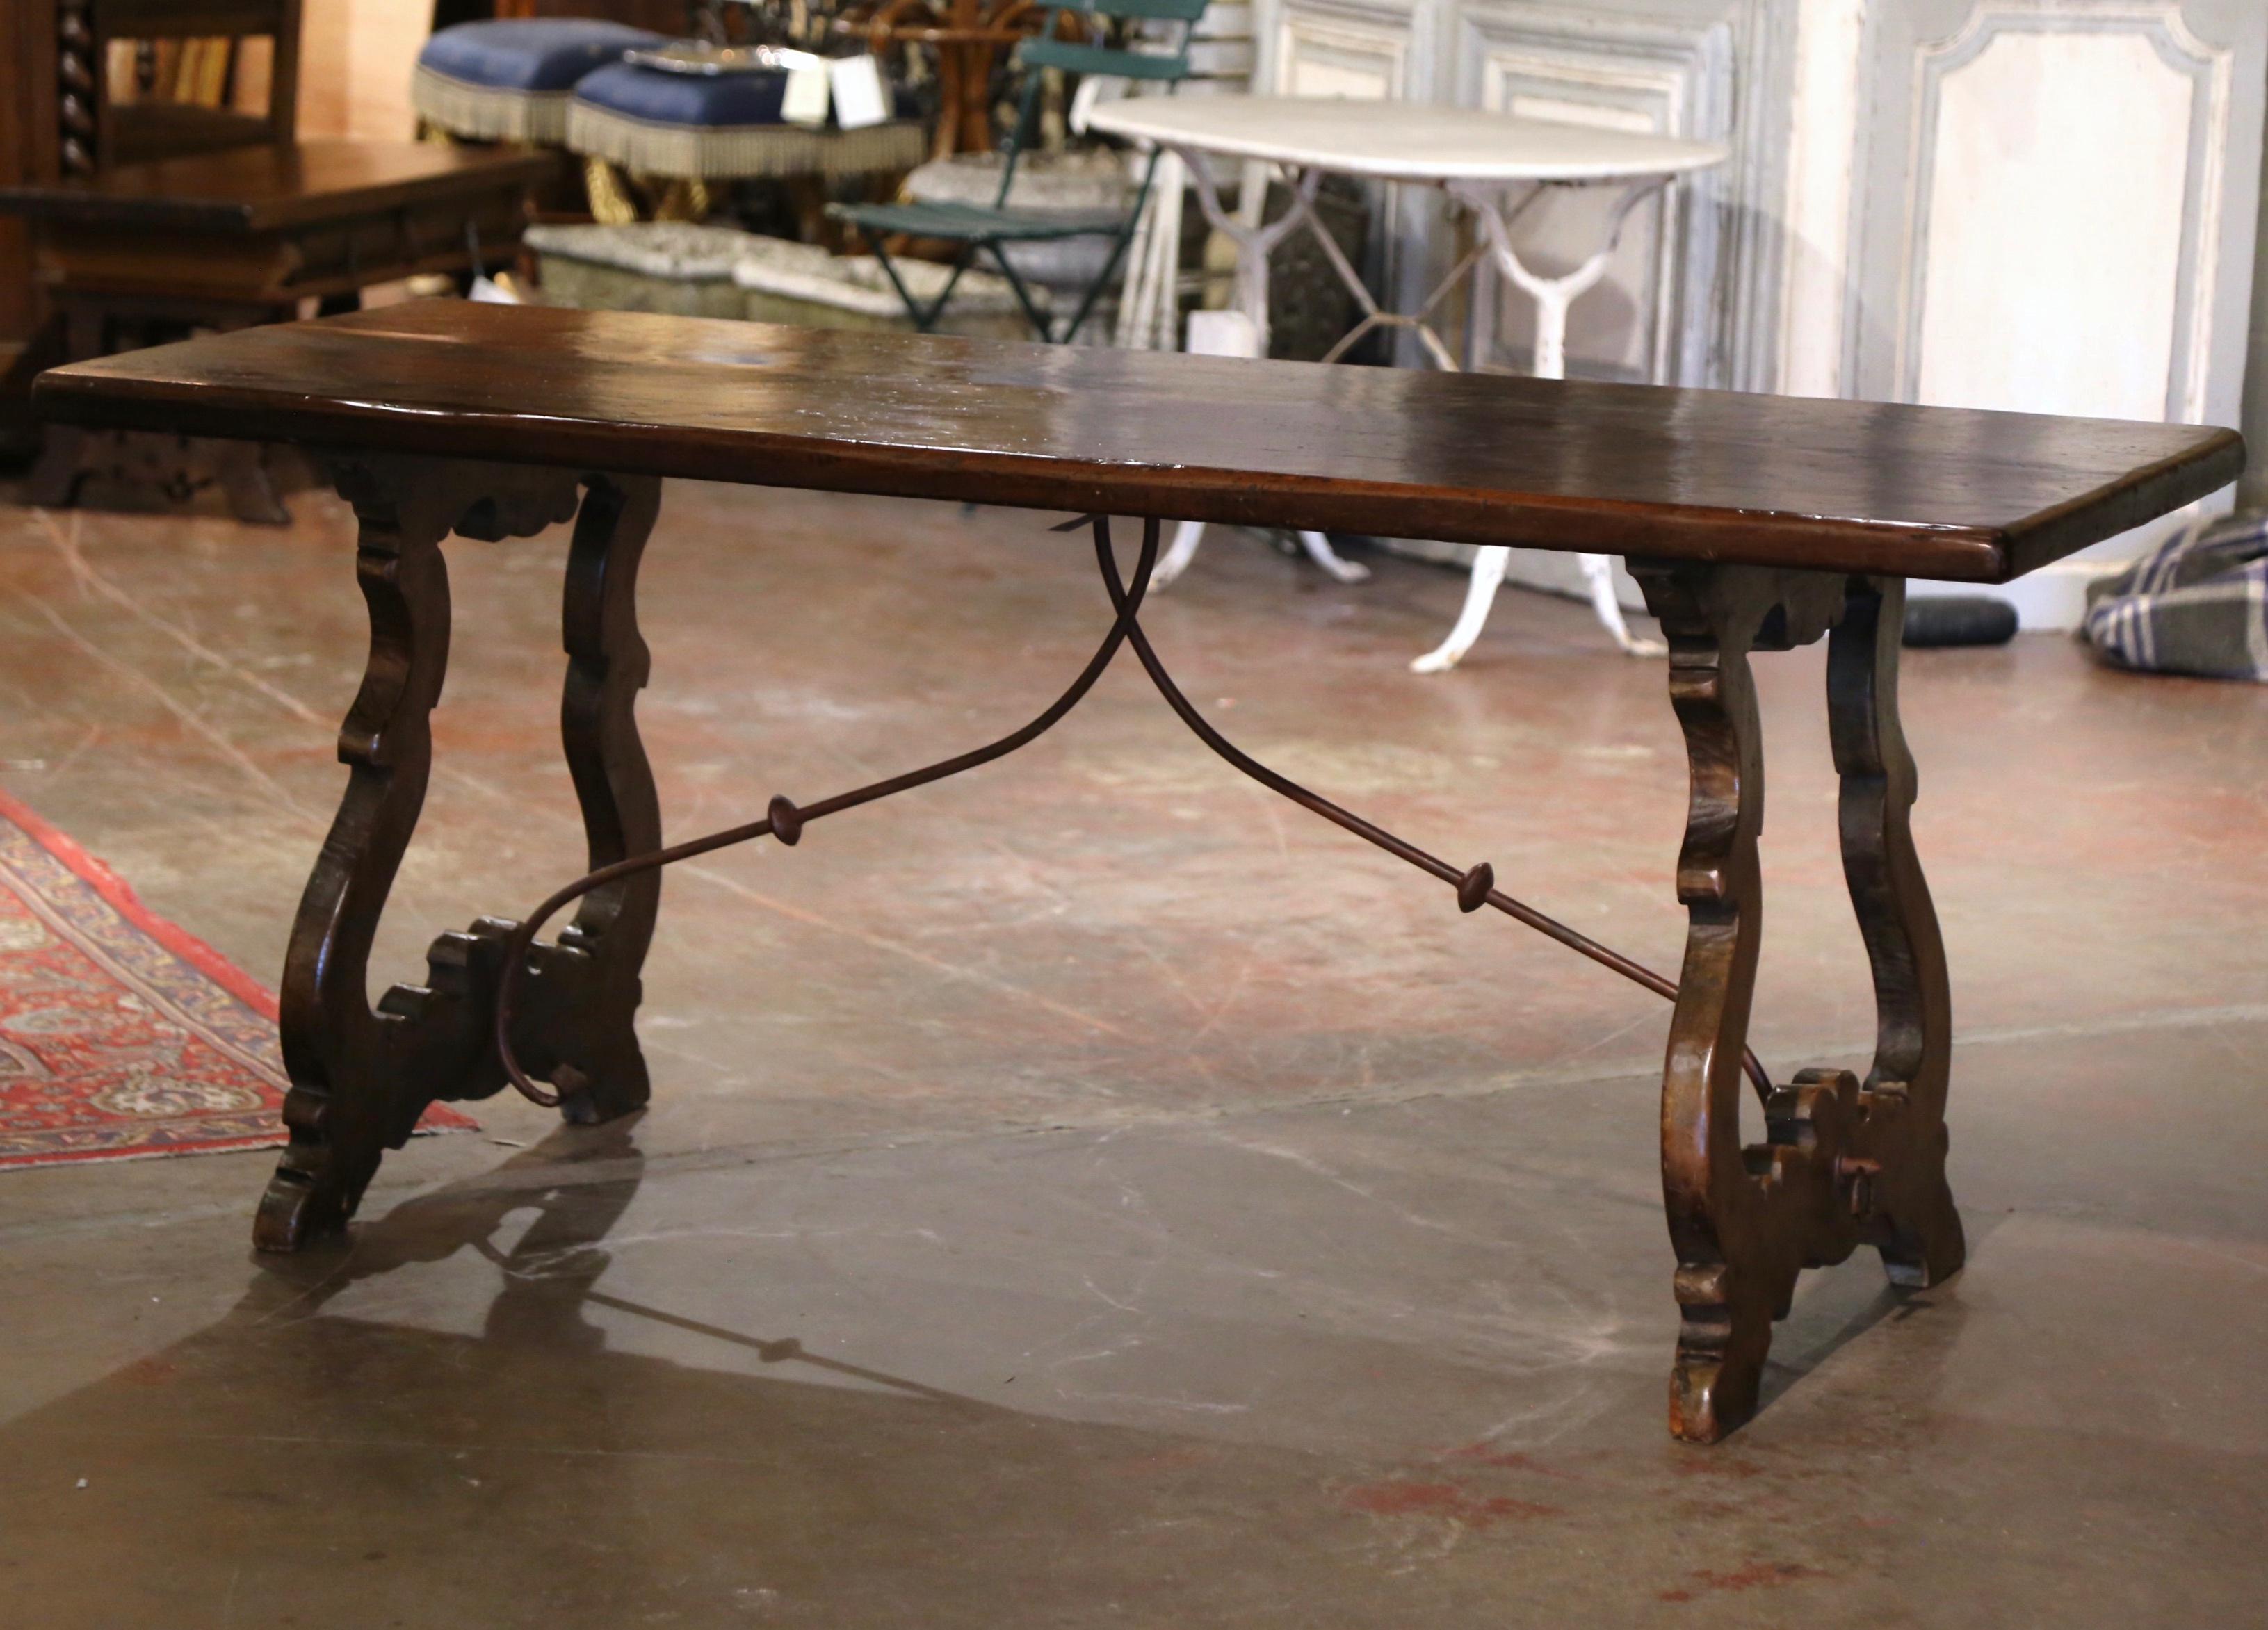 Decorate a dining or breakfast room with this elegant six foot antique table. Carved in Spain circa 1880, the trestle table stands on two intricate carved ox yoke leg supports, connected with a thick scrolled forged double iron stretcher. The